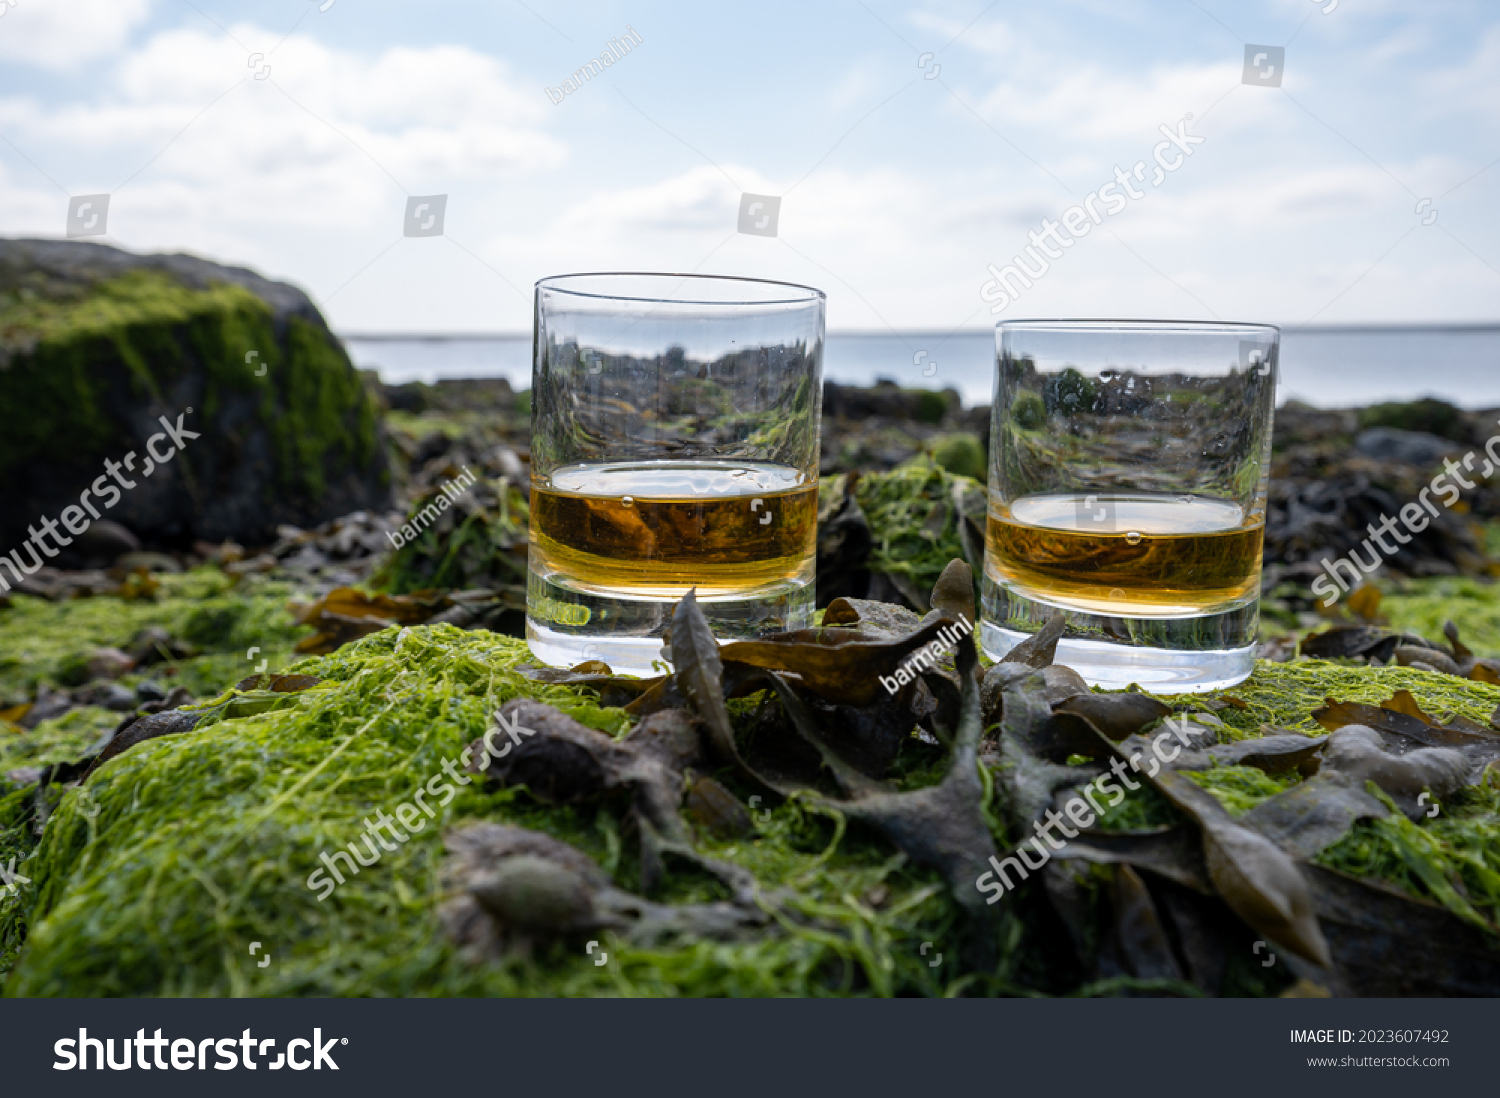 Tasting of single malt or blended Scotch whisky and seabed at low tide with algae, stones and oysters on background, private whisky distillery tours in Scotland, UK #2023607492